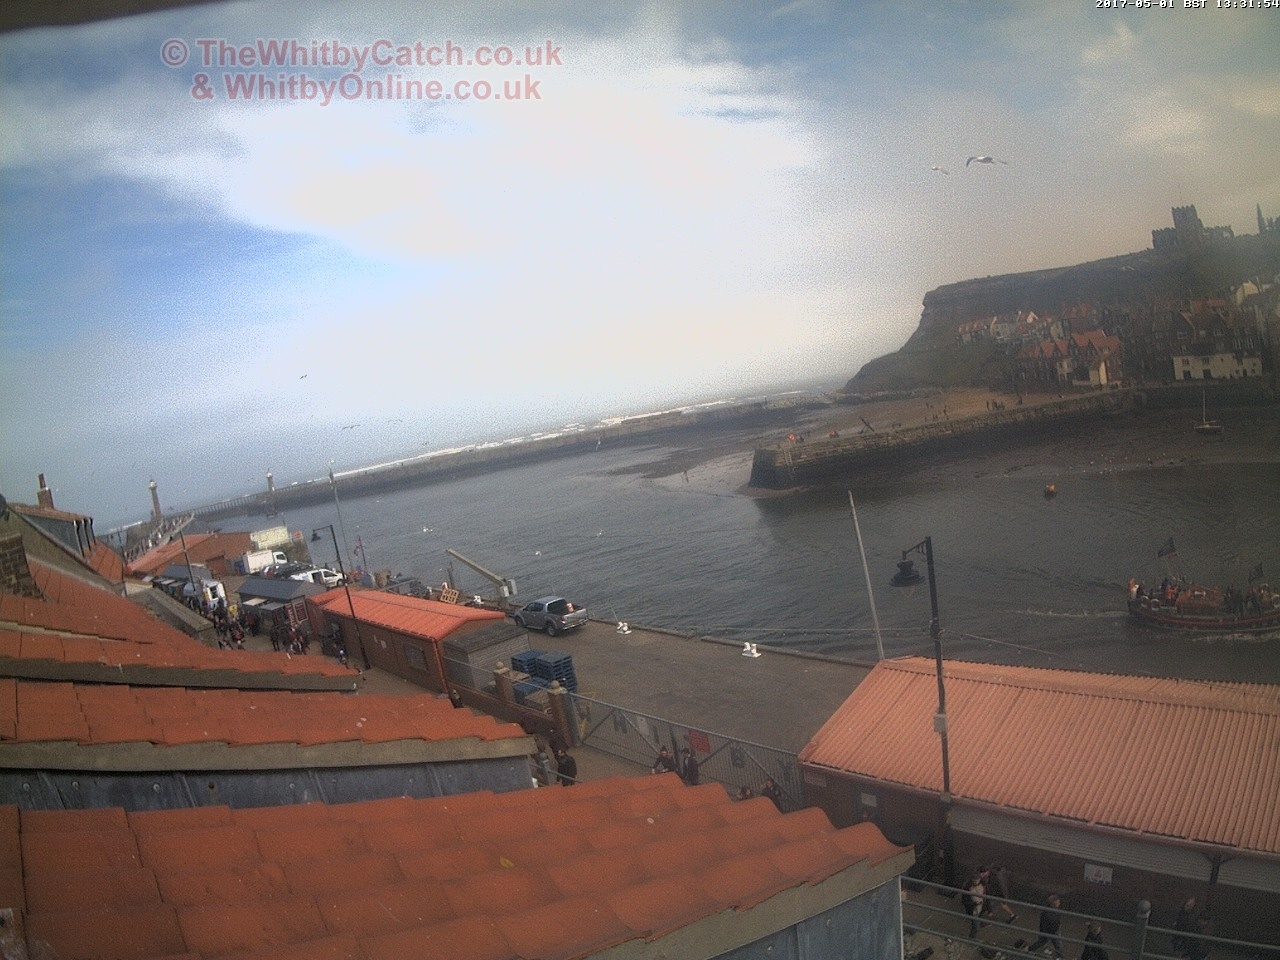 Whitby Mon 1st May 2017 13:32.